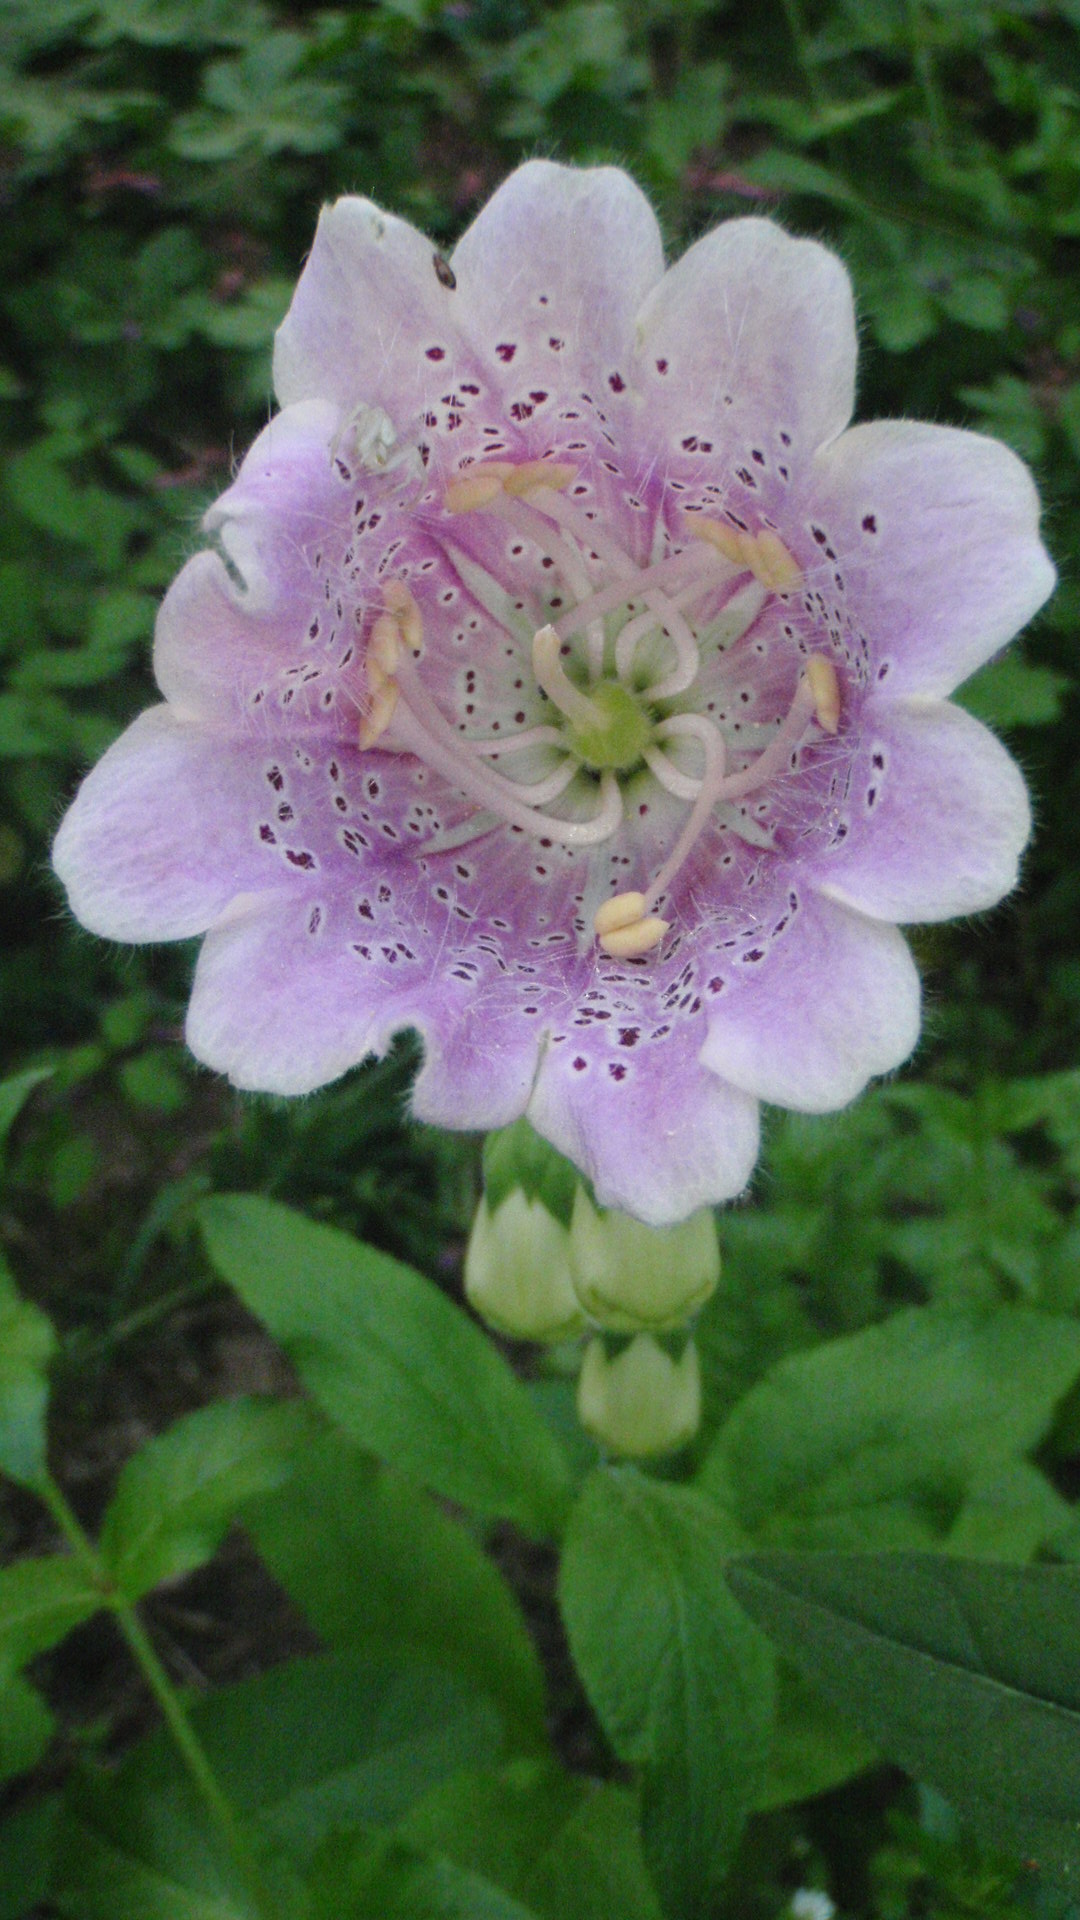 Foxglove mutant flower - we are all mutants; it is just a bit more obvious in some than others